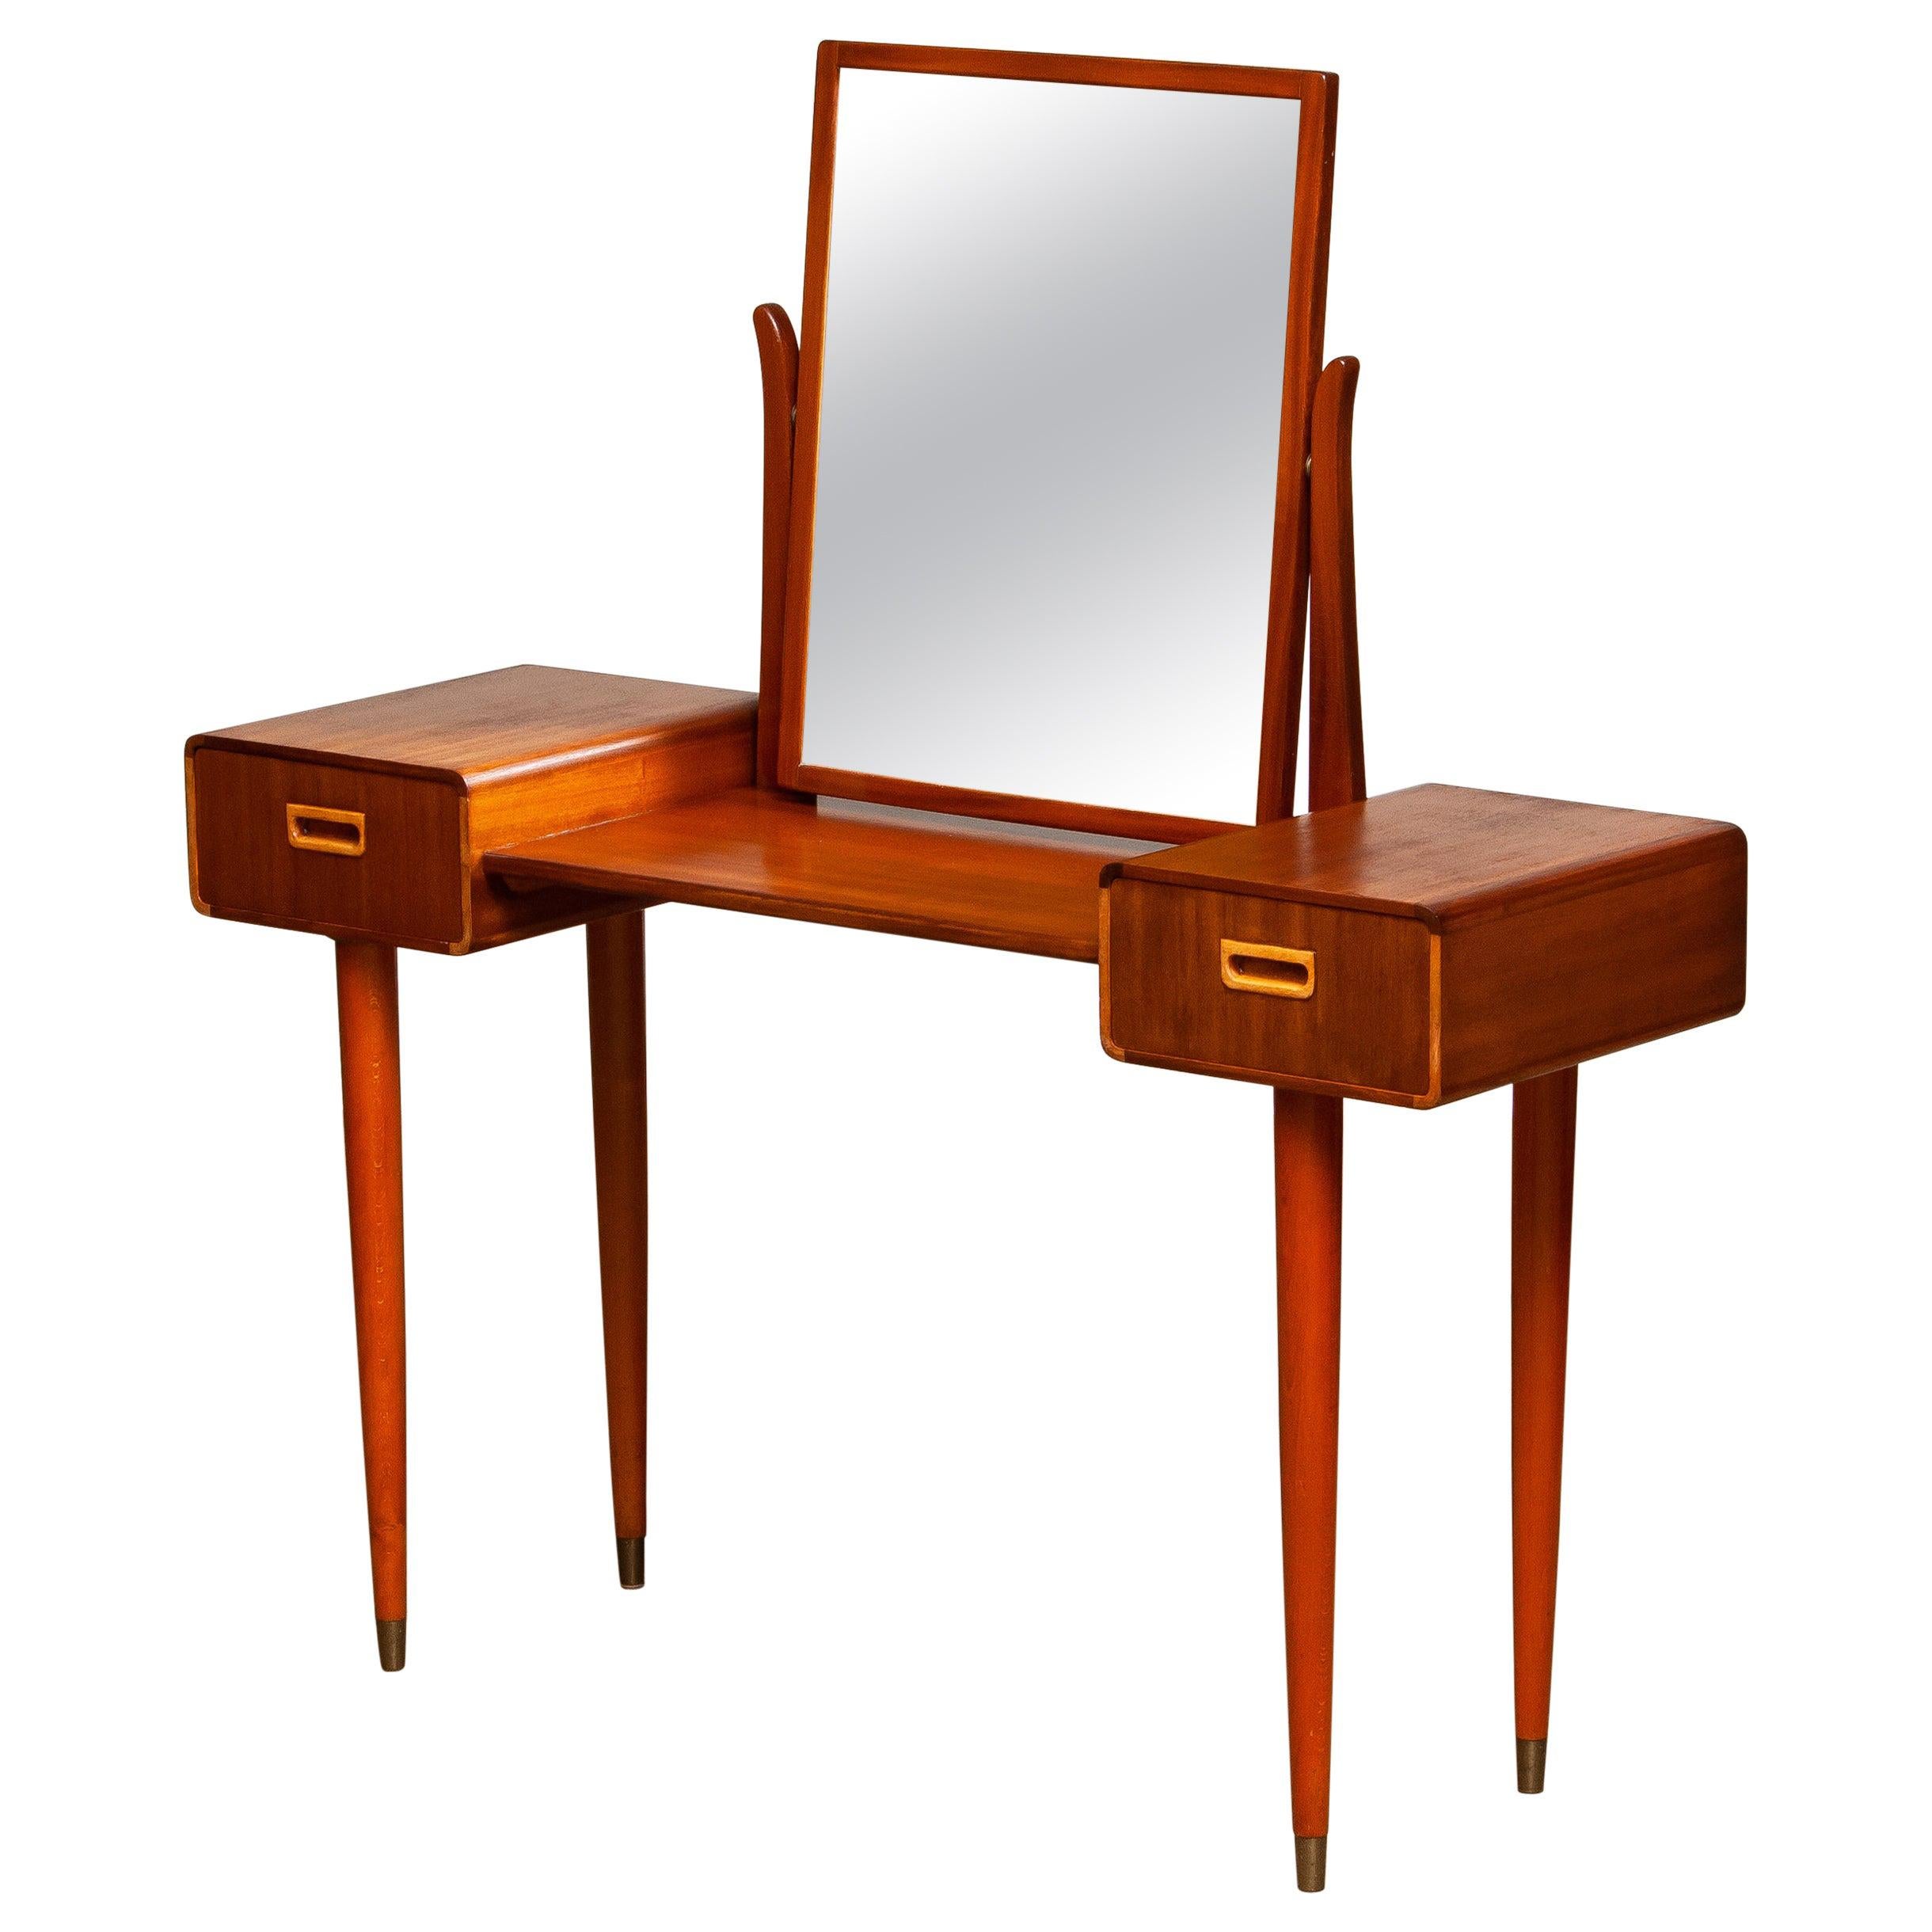 Beautiful and elegant mahogany vanity consisting two drawers and a adjustable mirror made by Tibro Möbler Sweden in the 1950's.
Allover in good condition.